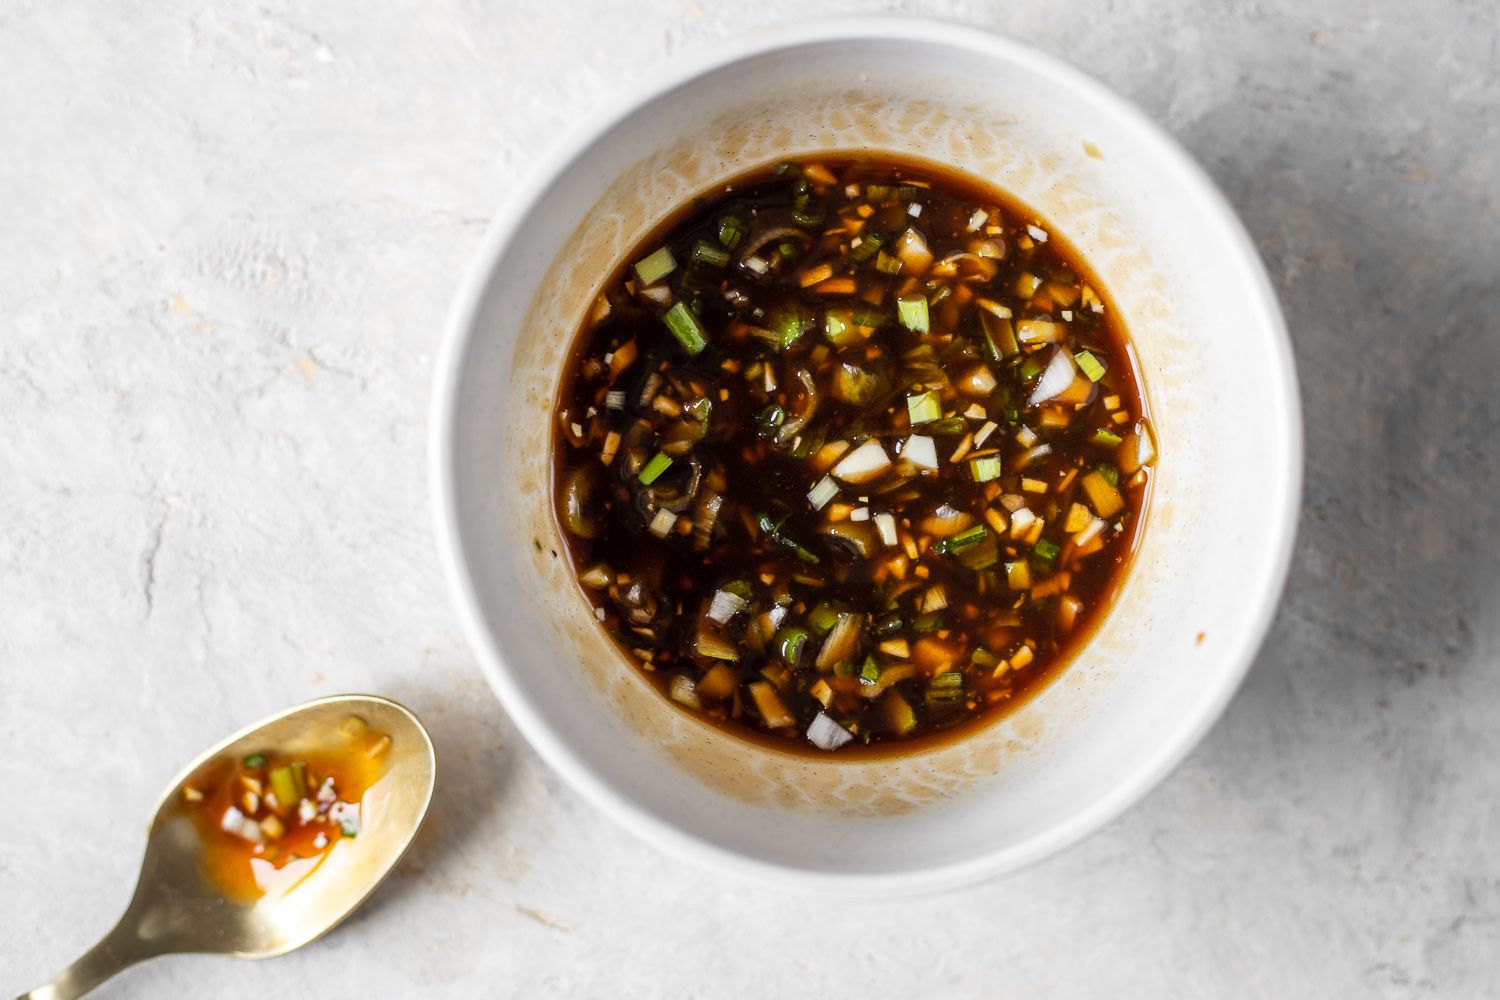 combine the oyster sauce, soy sauce, sherry, garlic and onion to make the glazing sauce